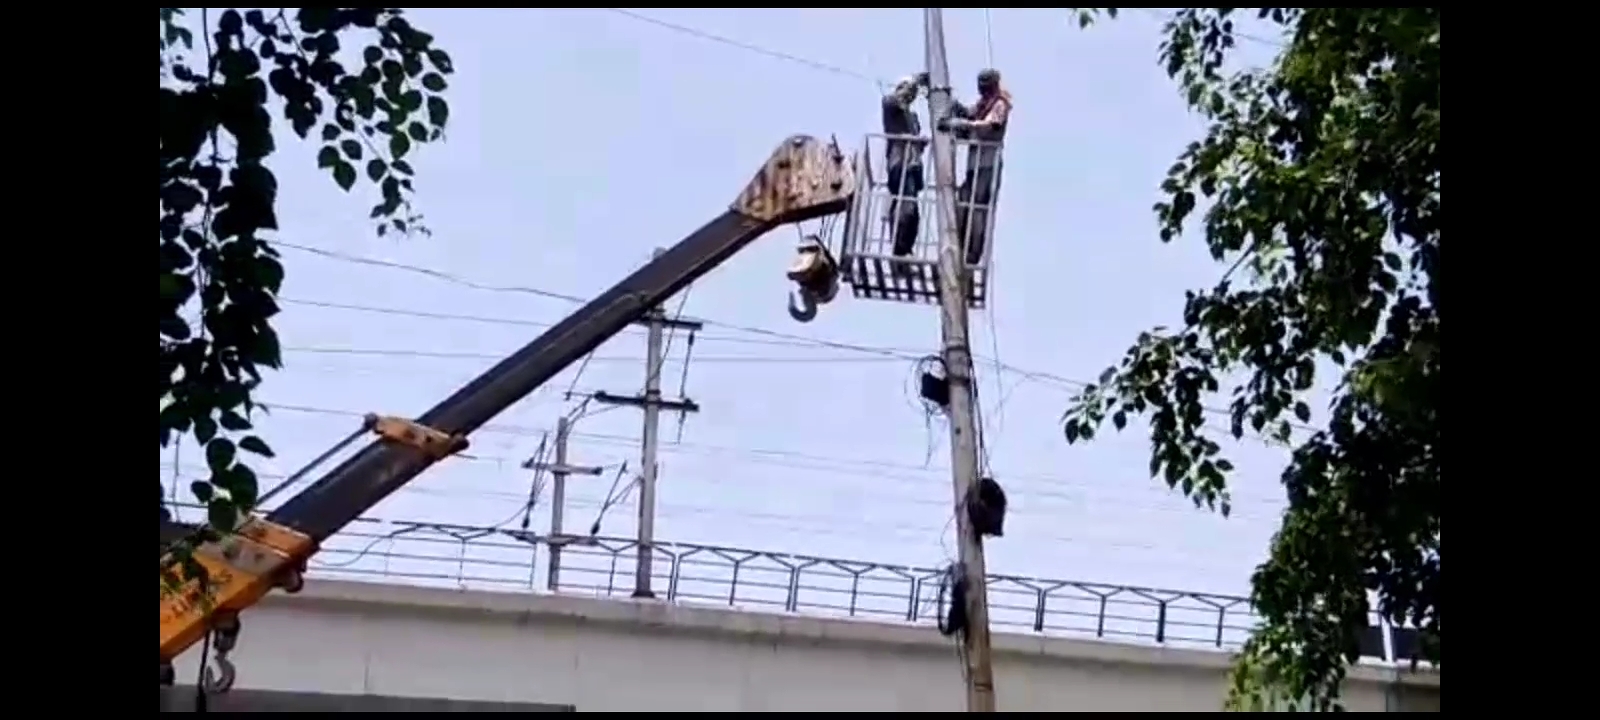 Electric poles are being painted before monsoon